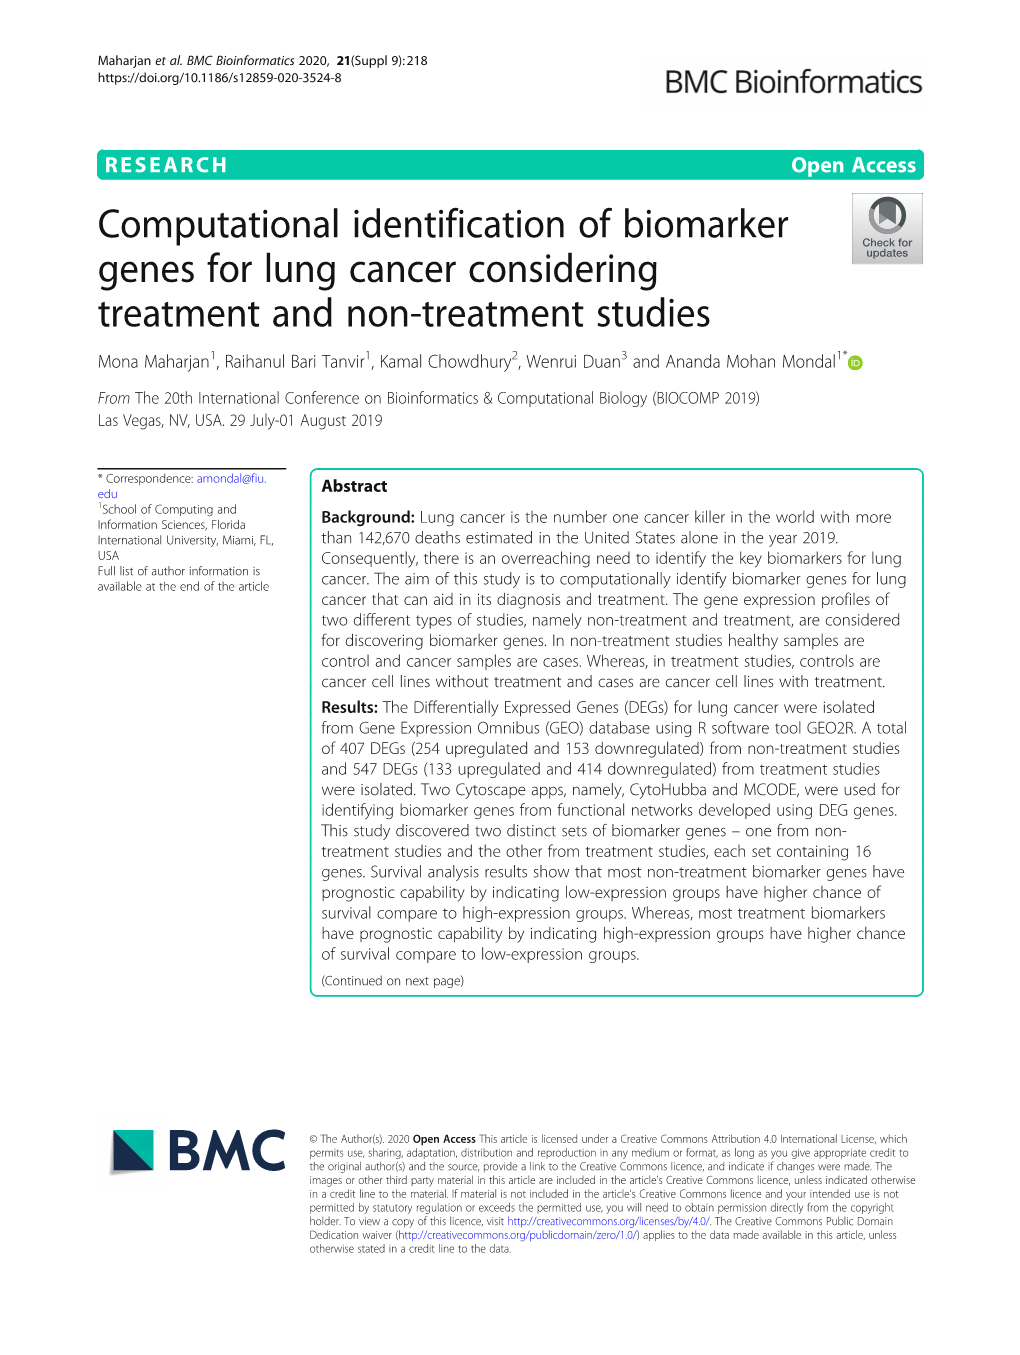 Computational Identification of Biomarker Genes for Lung Cancer